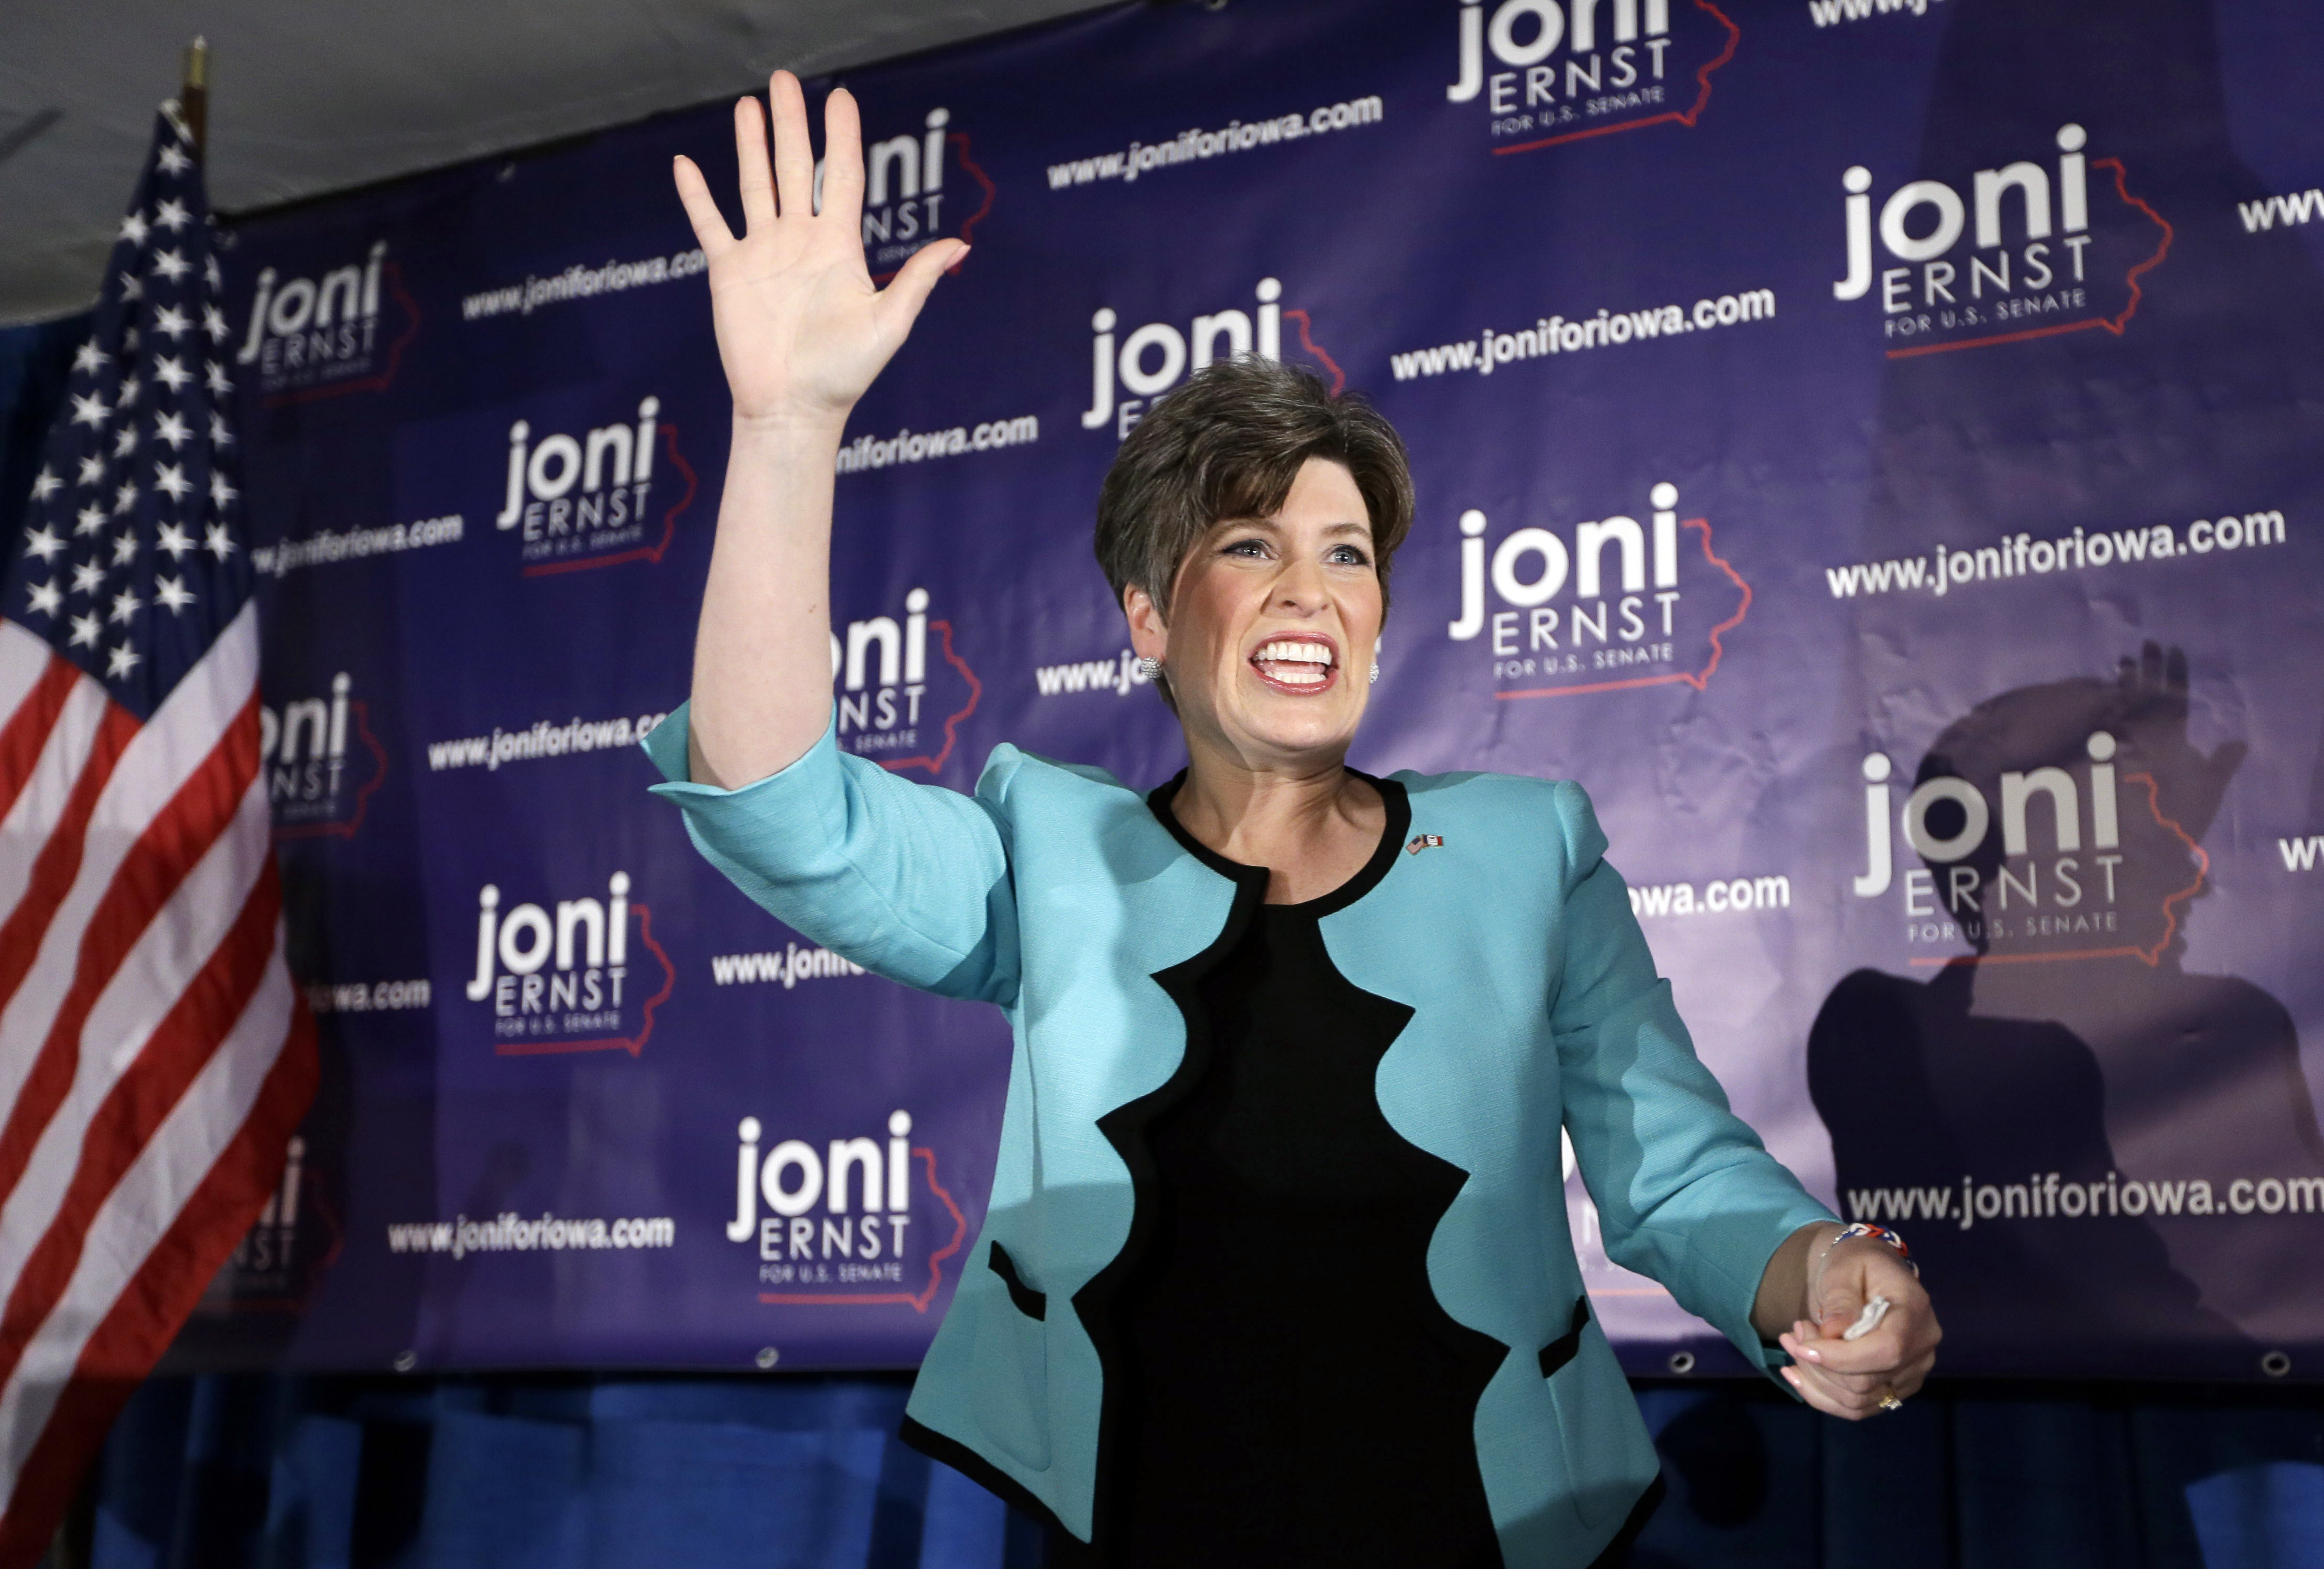 State Sen. Joni Ernst waves to supporters at a primary election night rally after winning the Republican nomination for the U.S. Senate, Tuesday, June 3, 2014, in Des Moines, Iowa. The 43-year-old Ernst won the nomination over five candidates. (Charlie Neibergall&mdash;ASSOCIATED PRESS)